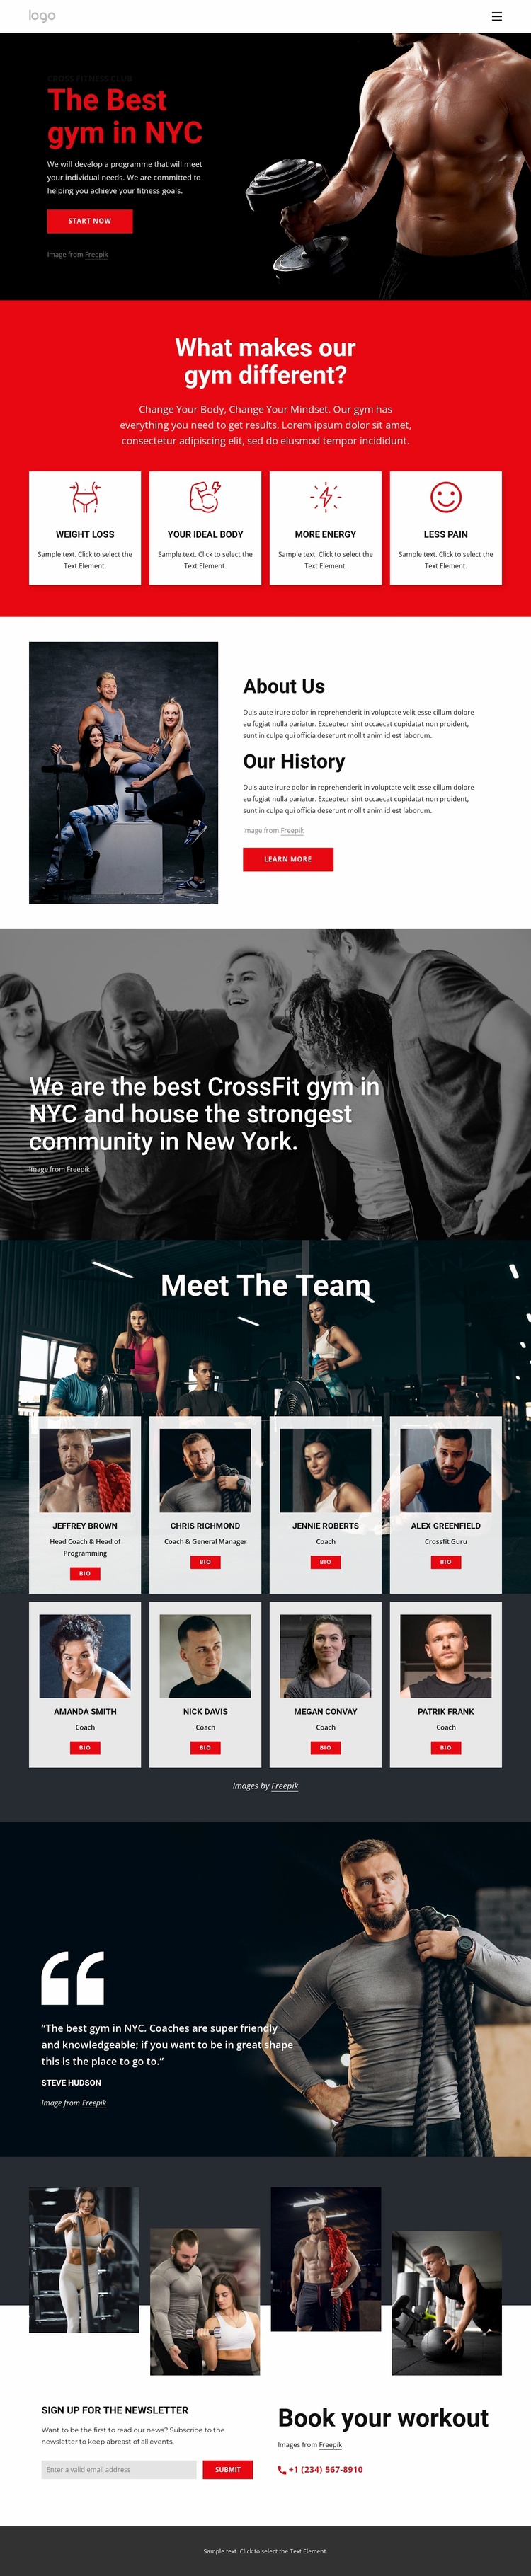 The best crossfit gym Landing Page